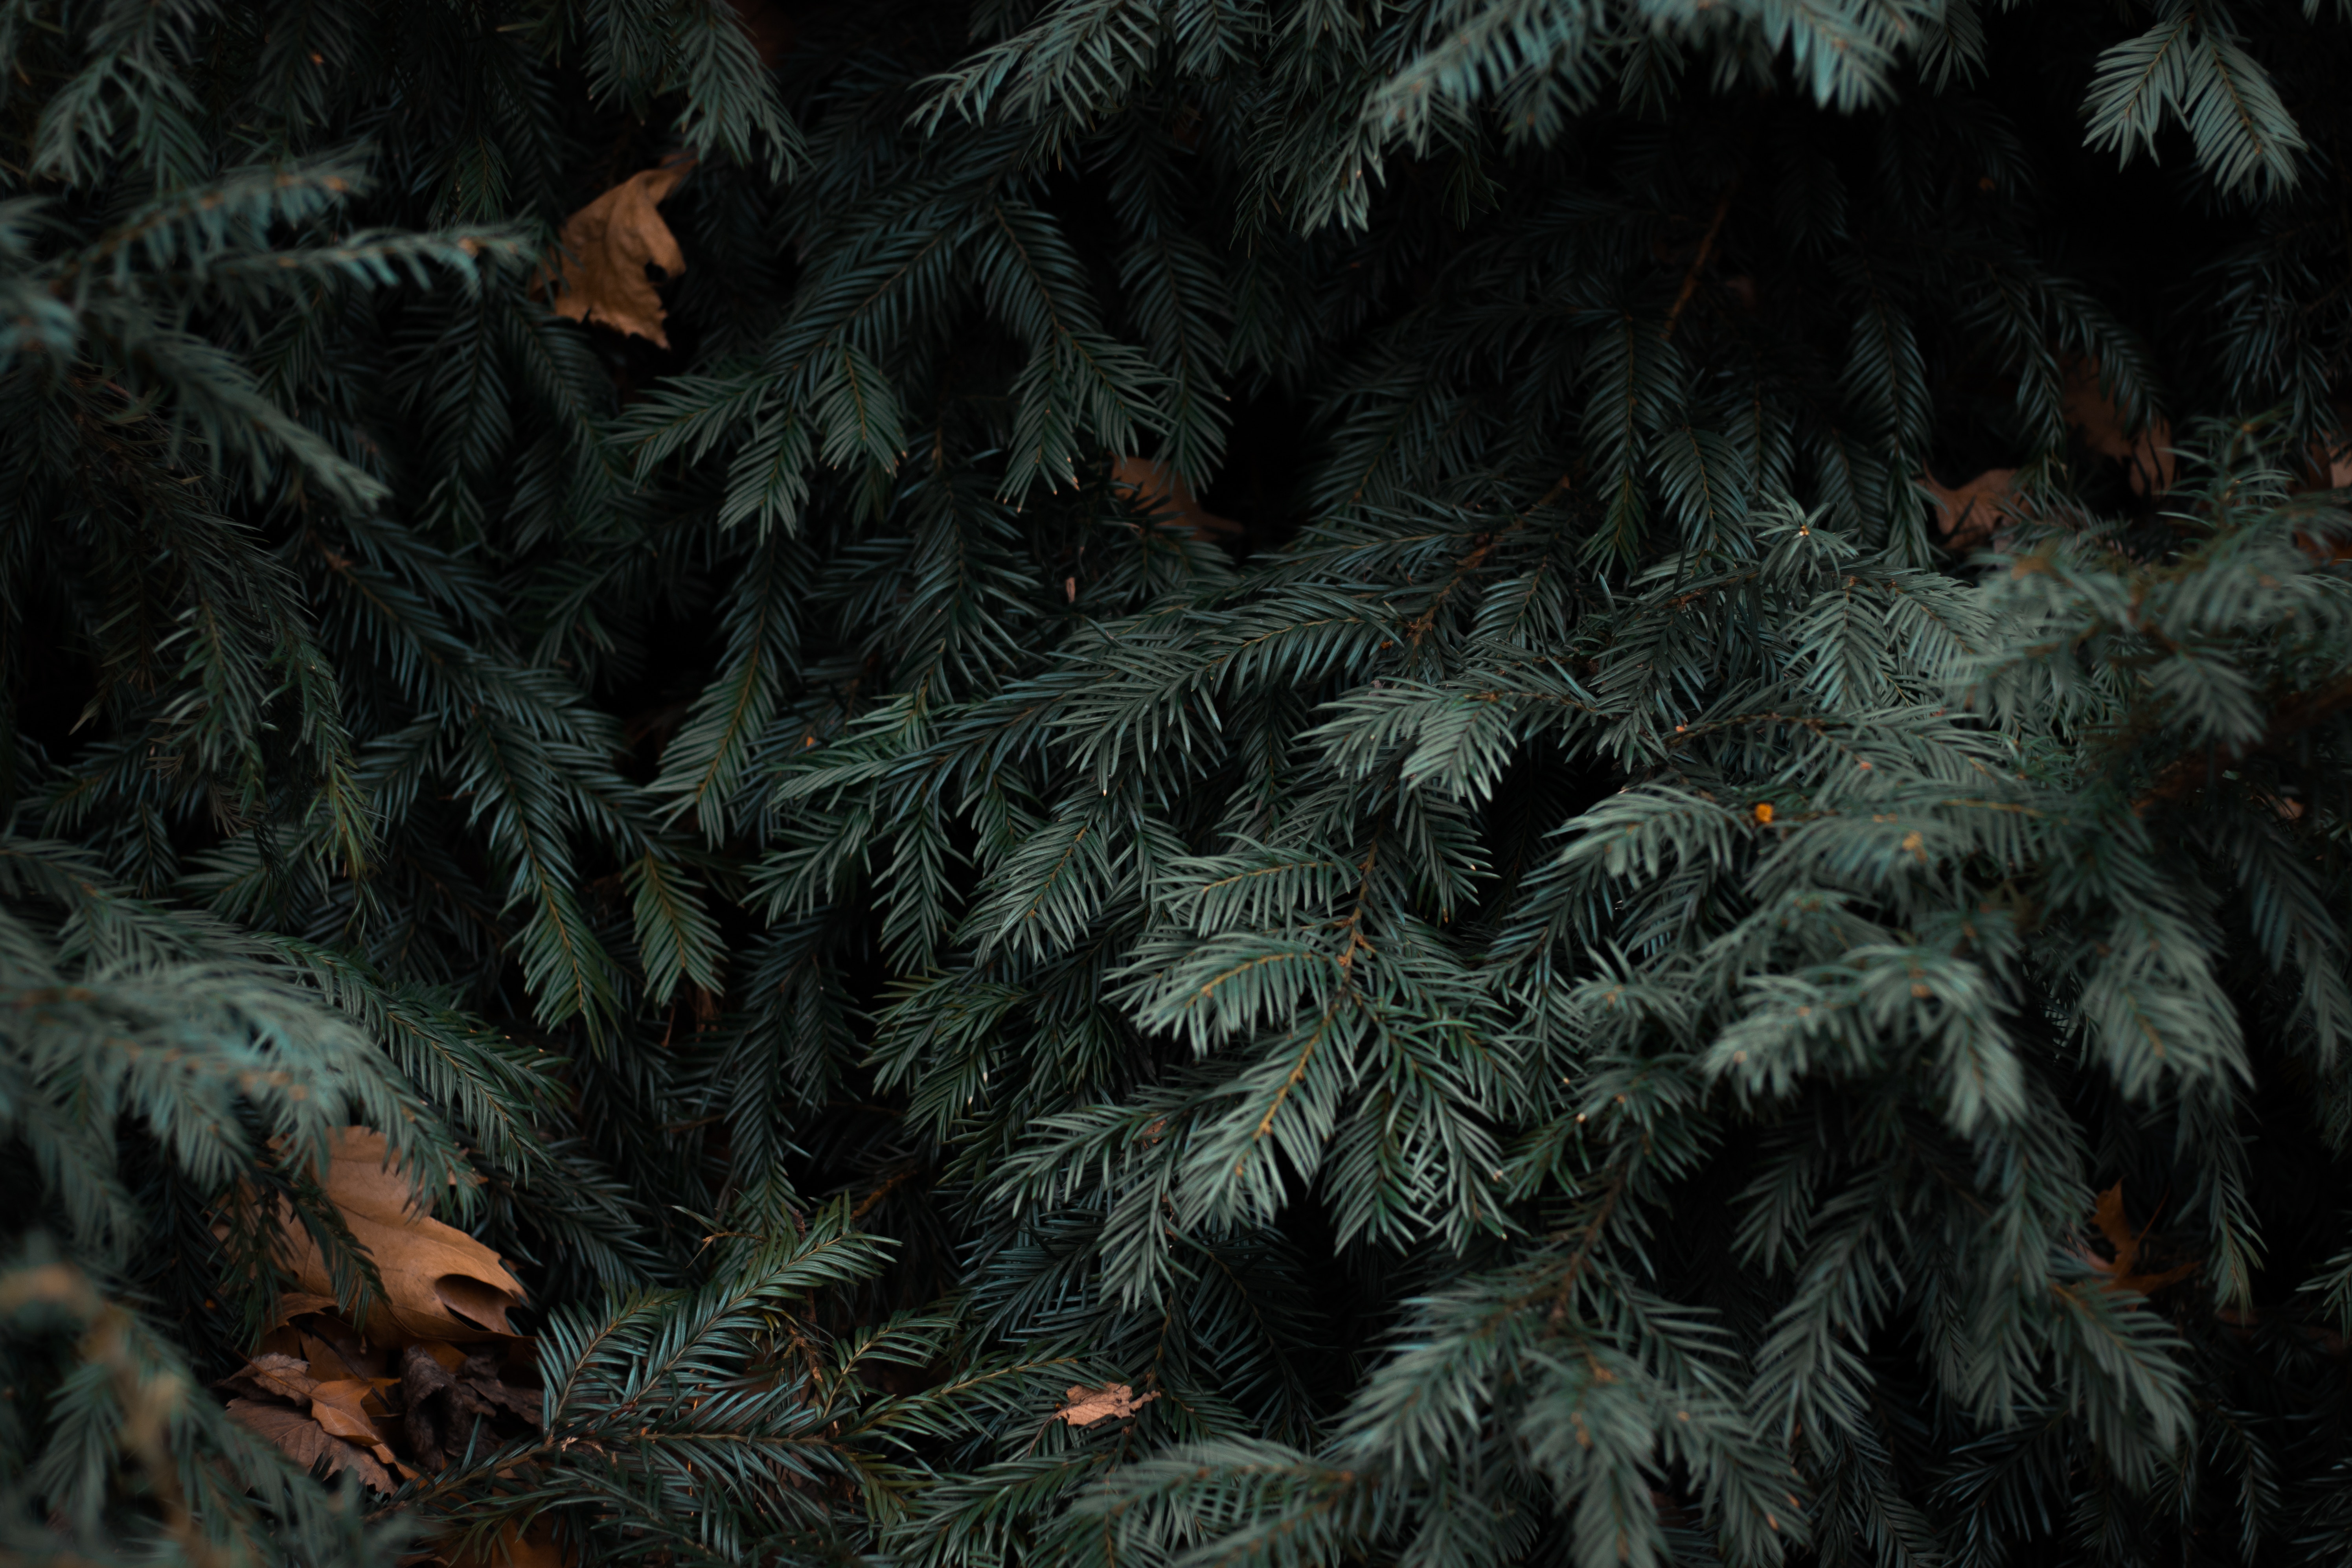 61663 download wallpaper nature, needle, green, branches, spruce, fir, needles screensavers and pictures for free